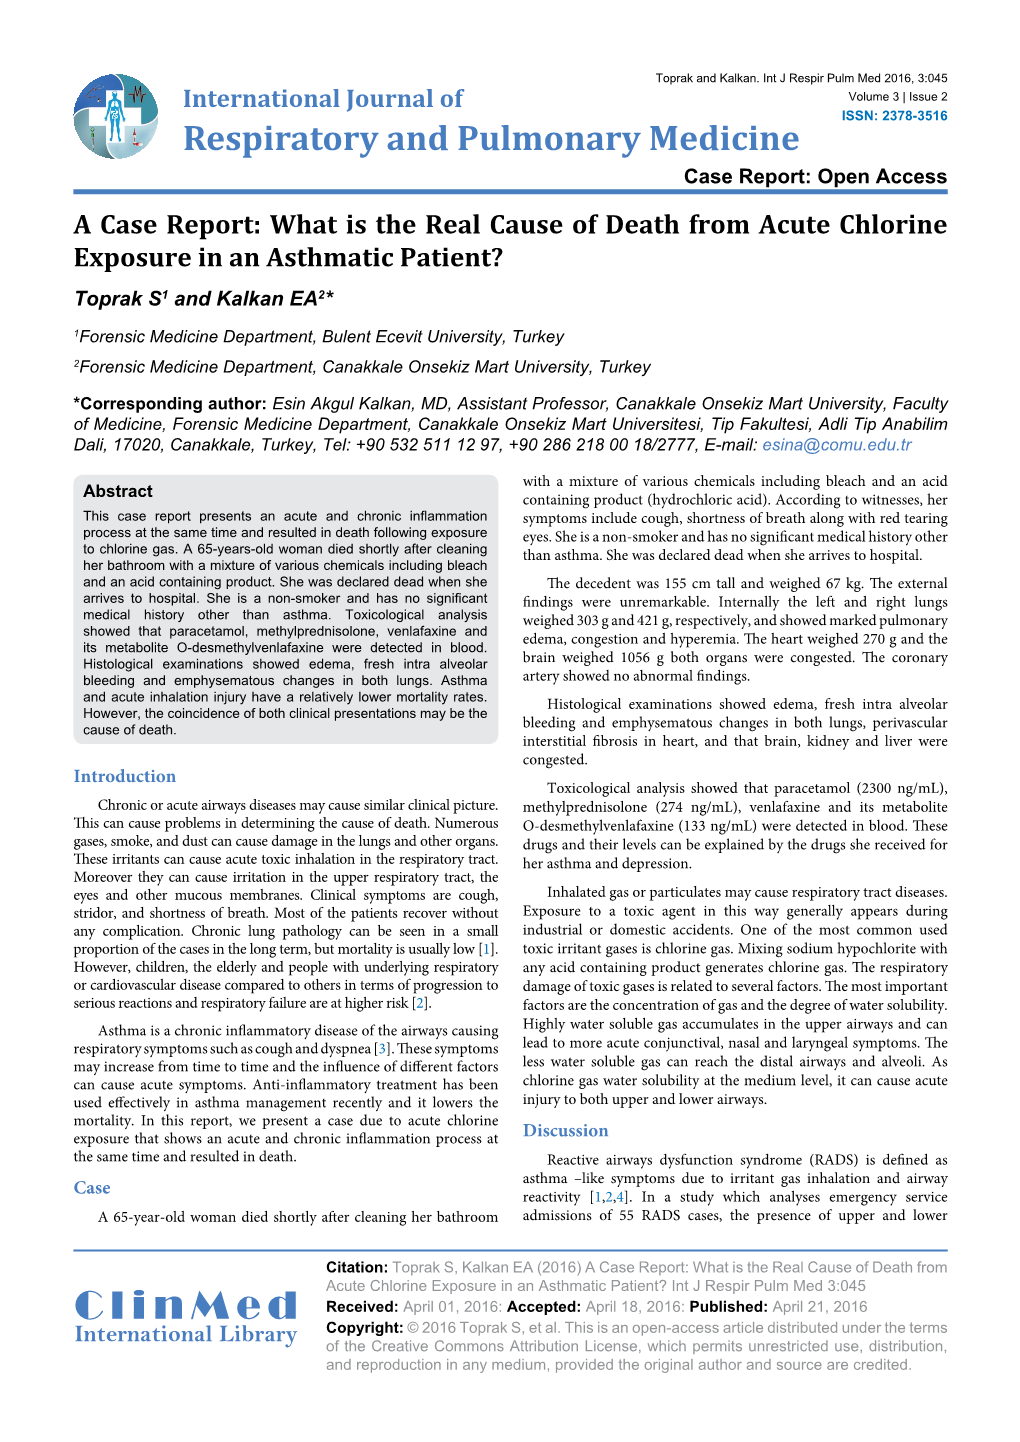 A Case Report: What Is the Real Cause of Death from Acute Chlorine Exposure in an Asthmatic Patient? Toprak S1 and Kalkan EA2*